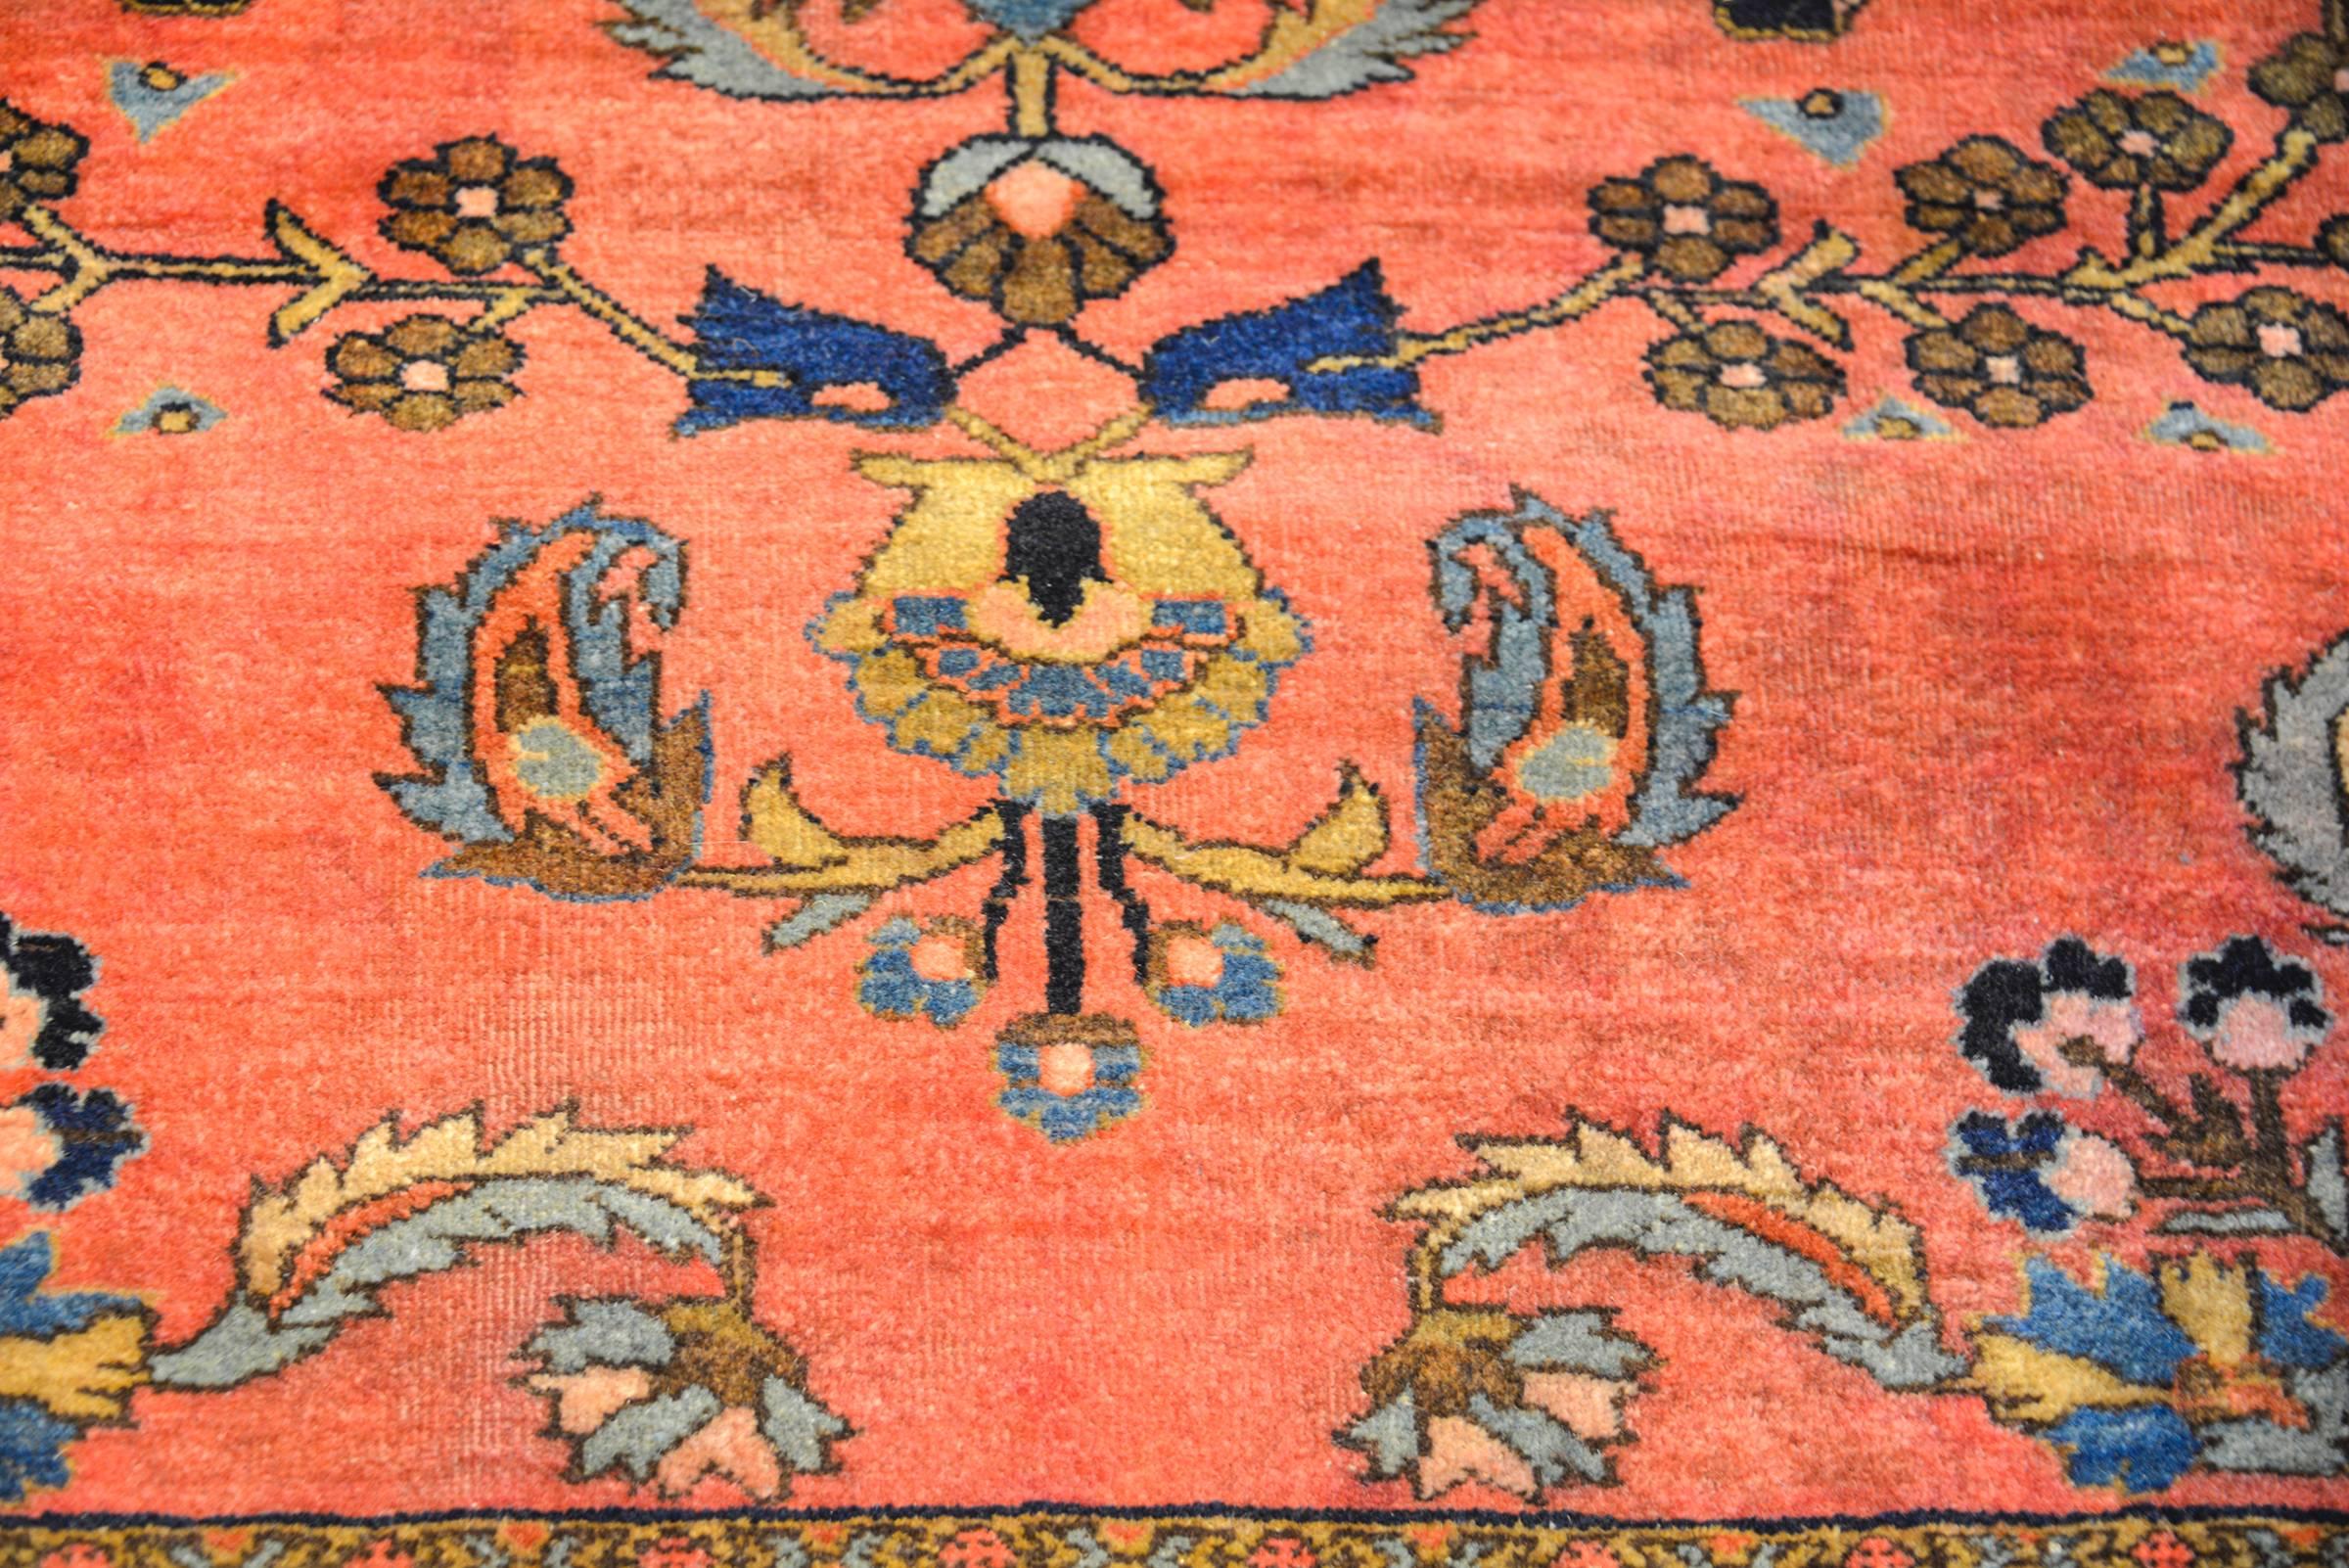 A remarkable early 20th century Persian Sarouk Maharajan with an exquisite all-over mirrored floral and tree-of-life pattern woven in multicolored vegetable dyed wool on a salmon colored background. The border is complex with multiple wide and